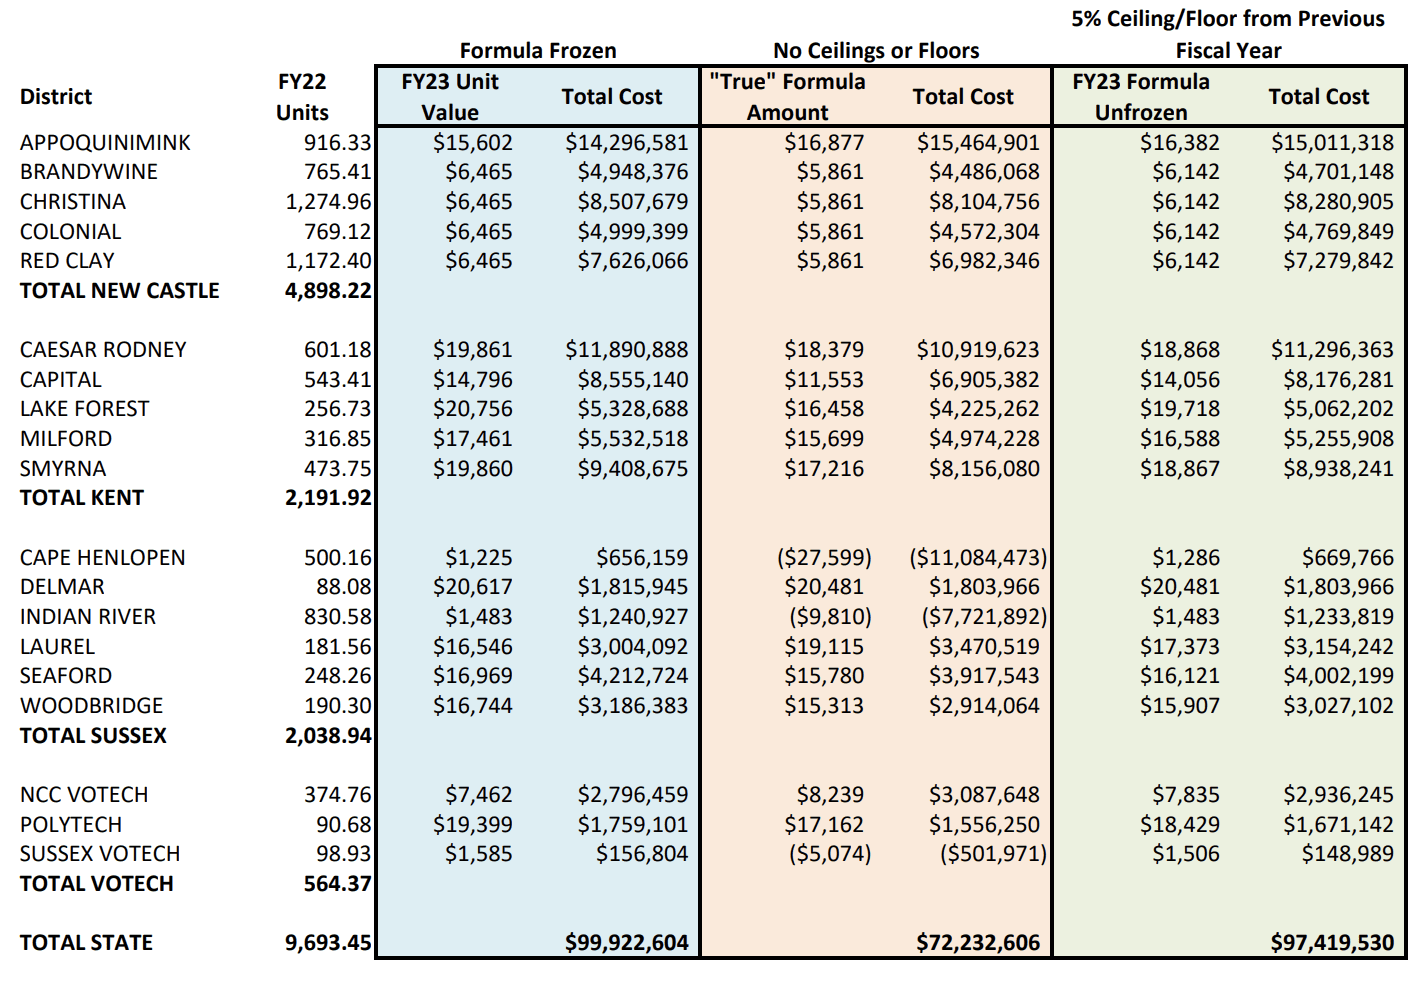 The amount of state funding for each district. The blue column shows the current funding, with the formula frozen. The tan column shows the true funding with the equalization, without the 5% minimum and maximum adjustment, and the green column is the equalized funding with the 5% adjustment threshold.